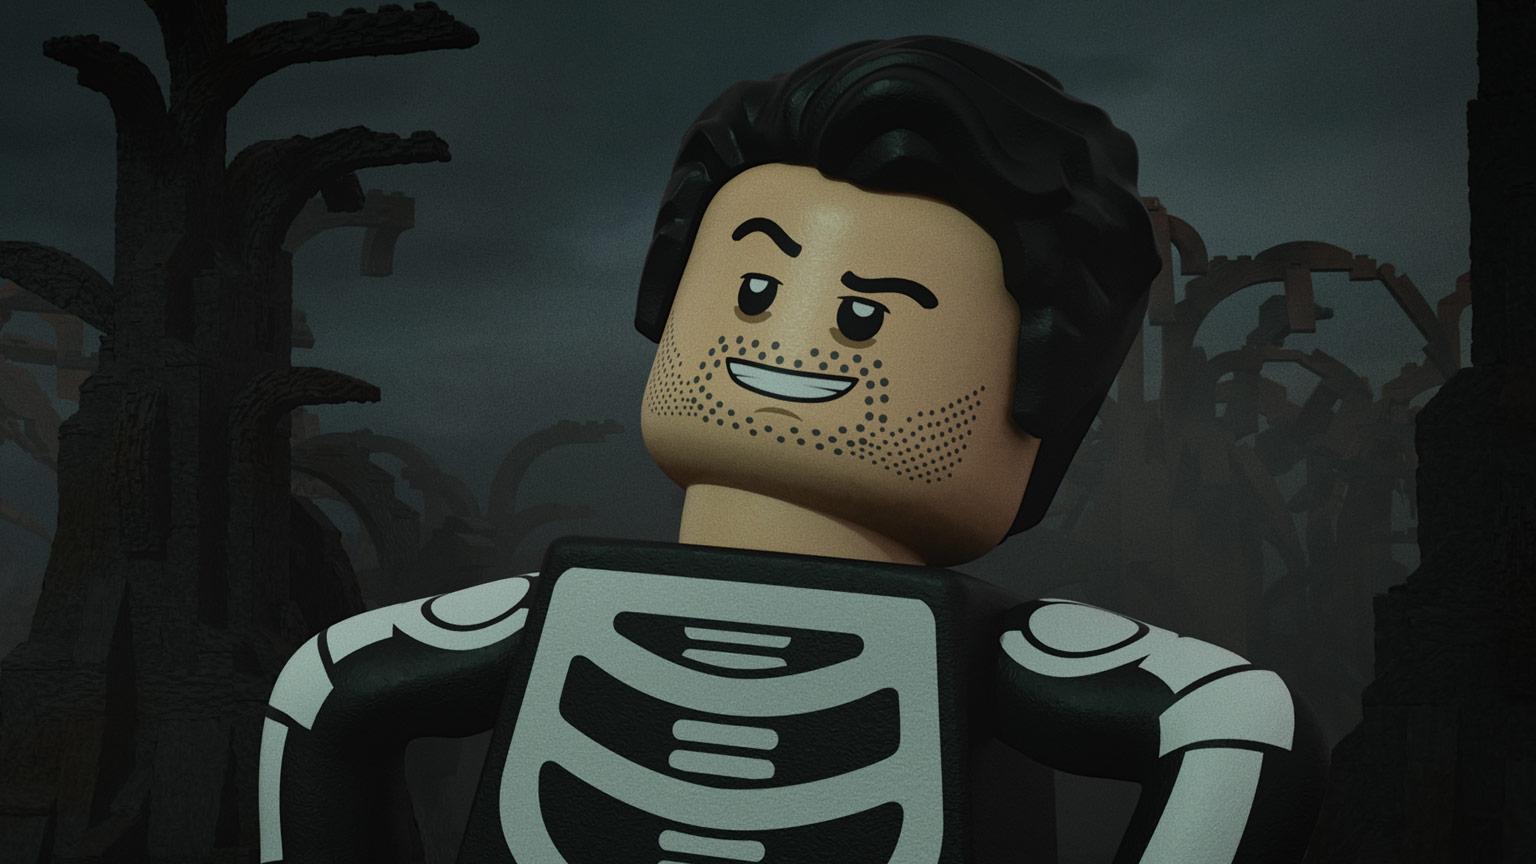 Lego Star Wars Terrifying Tales New Movie 2021 Wallpapers